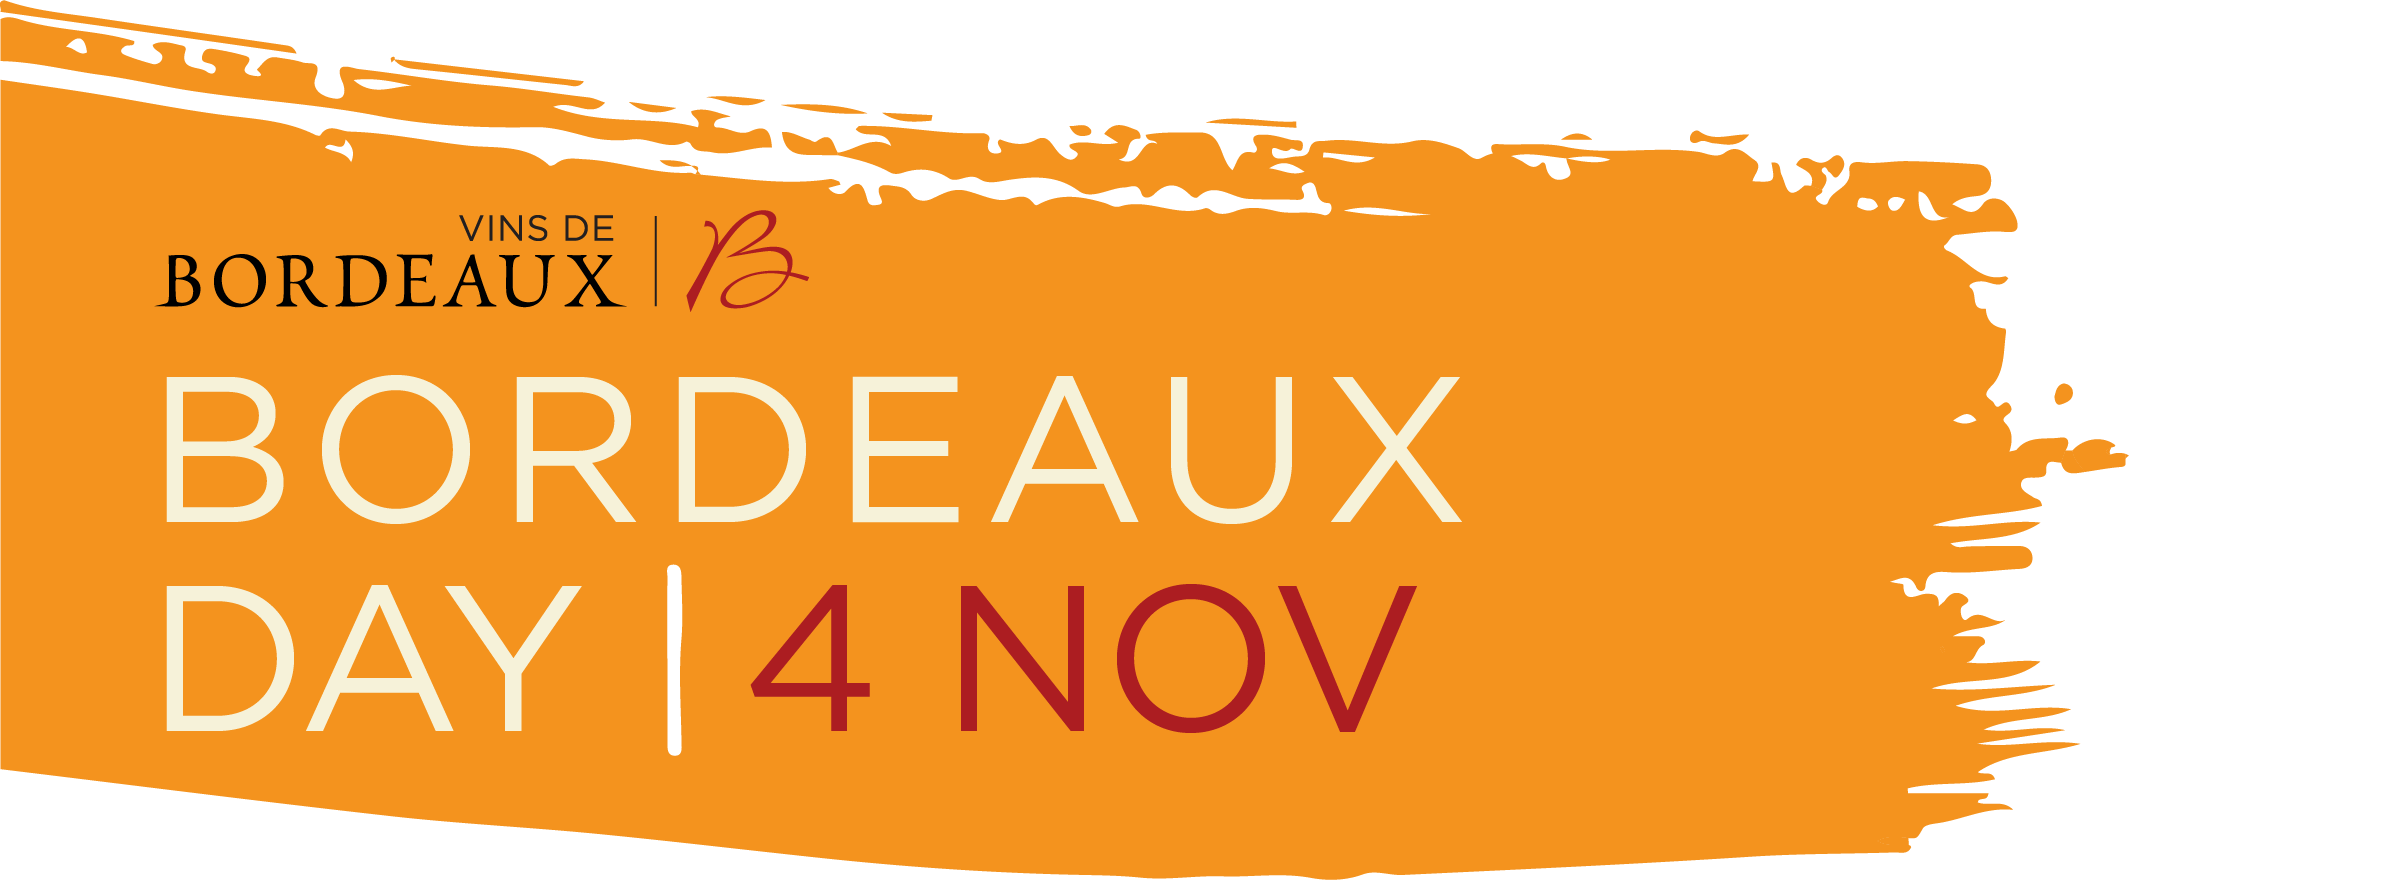 NEW DATE FOR BORDEAUX DAY – WEDNESDAY 4th NOVEMBER